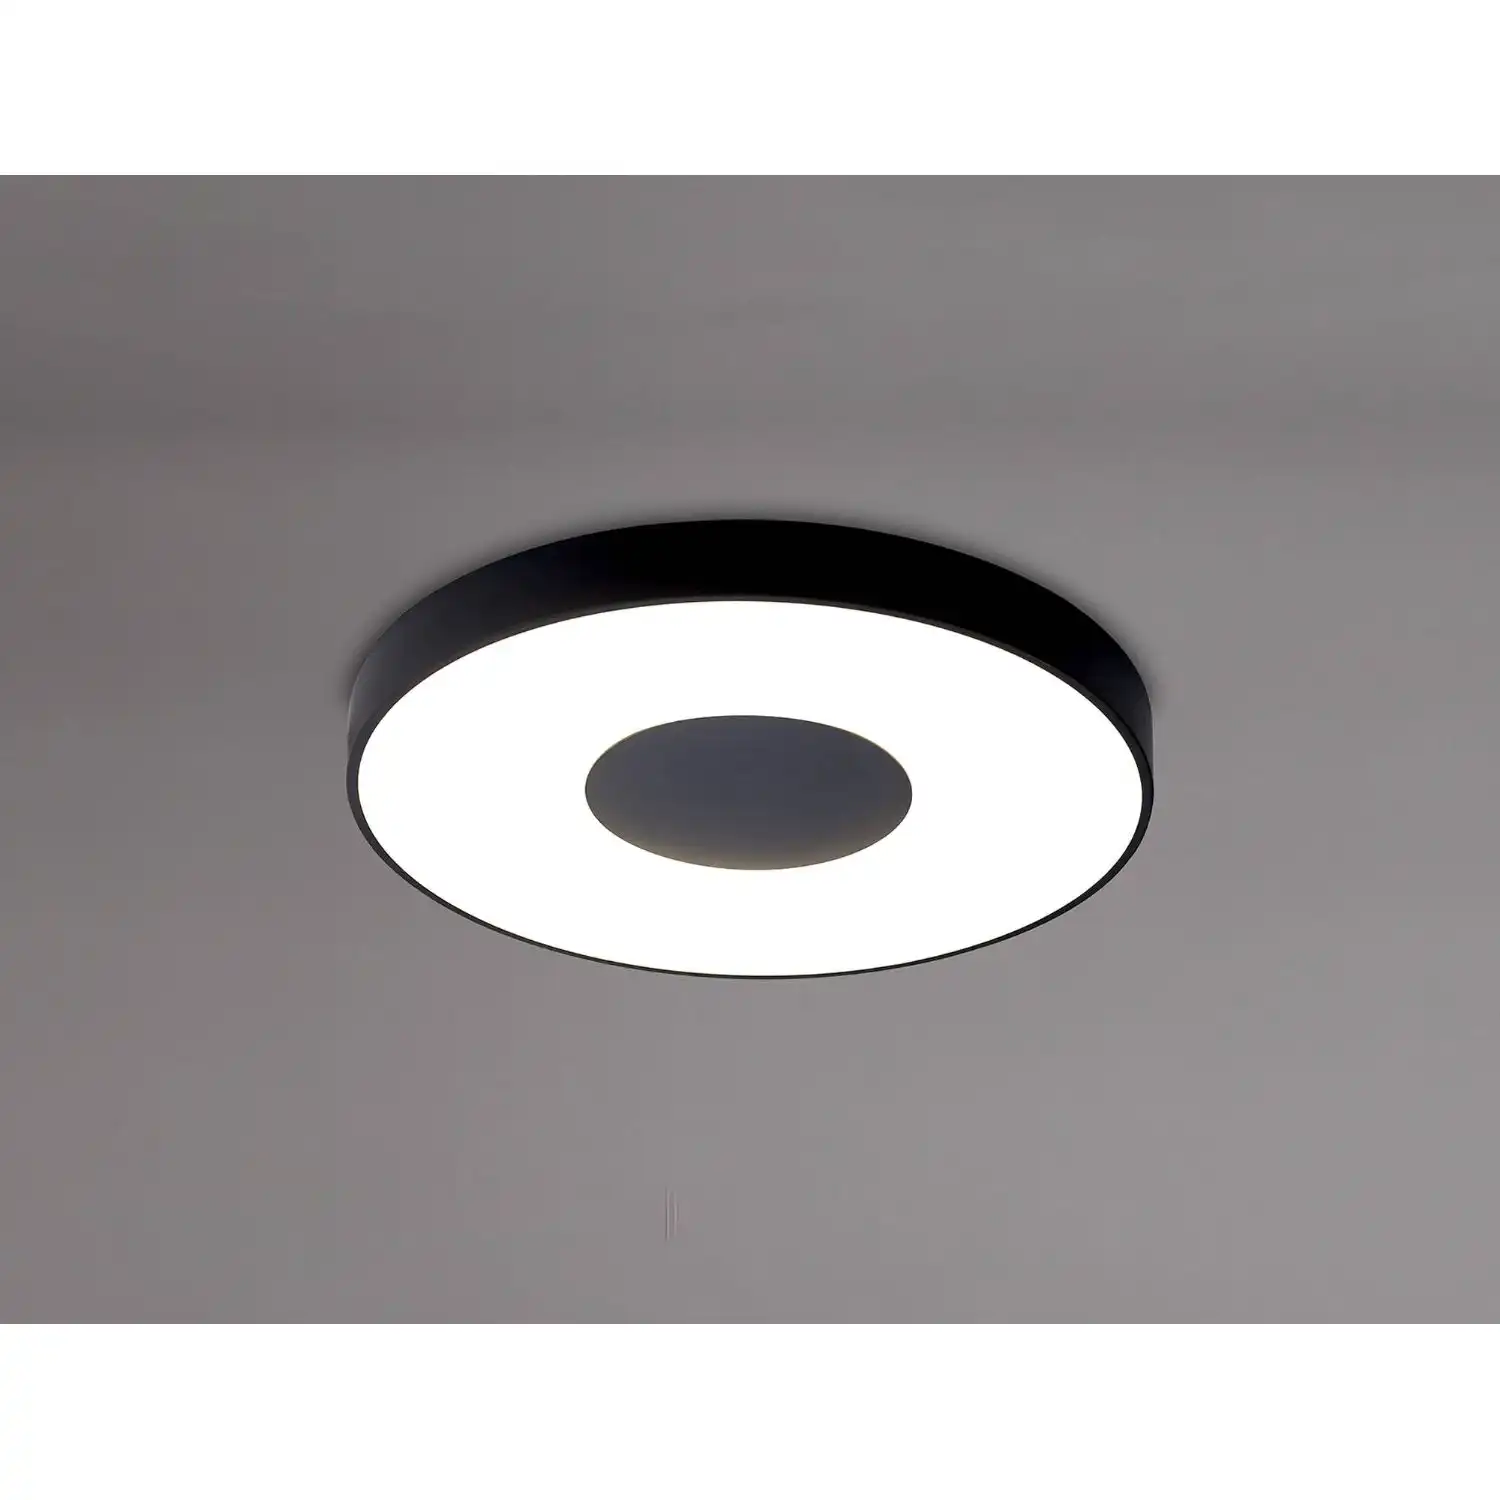 Coin Round Ceiling 80W LED With Remote Control 2700K 5000K, 3900lm, Black, 3yrs Warranty